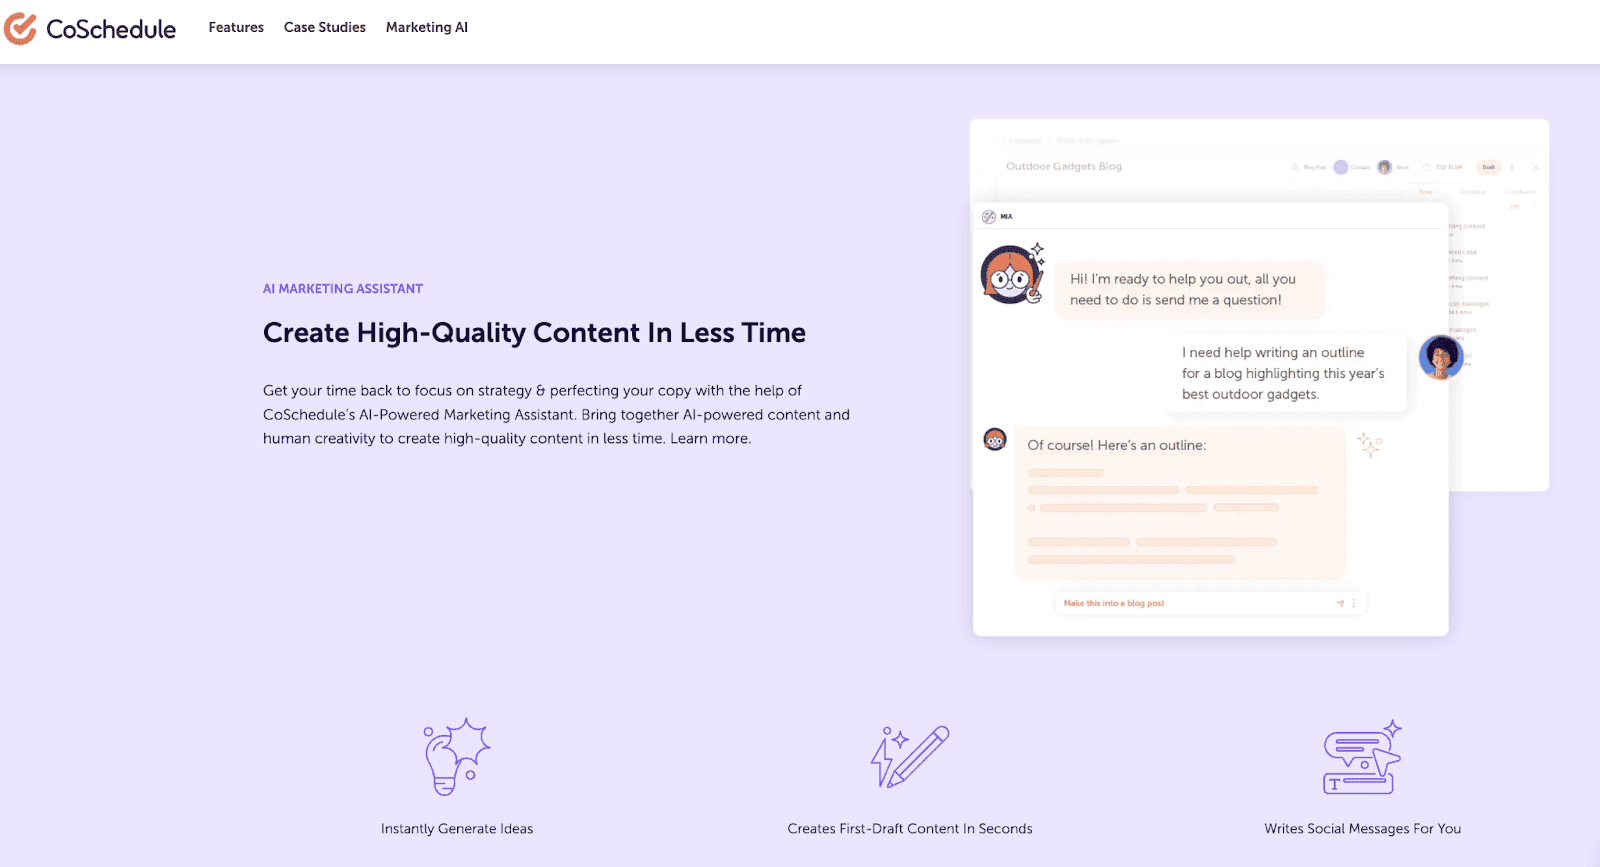 CoSchedule's content calendar allows you to create high-quality content in less time